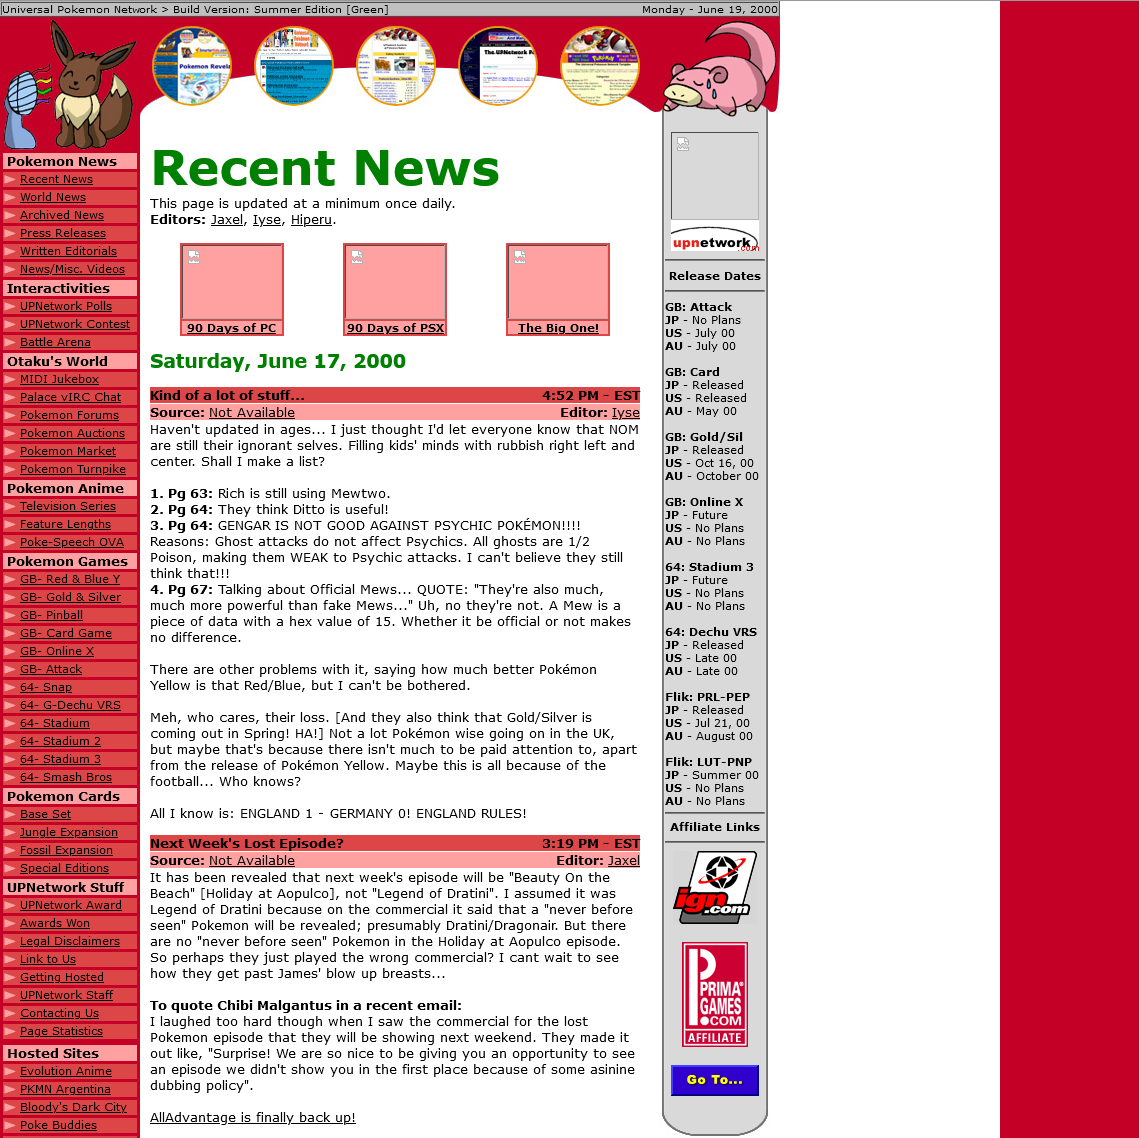 UPNetwork's website layout from June 2000